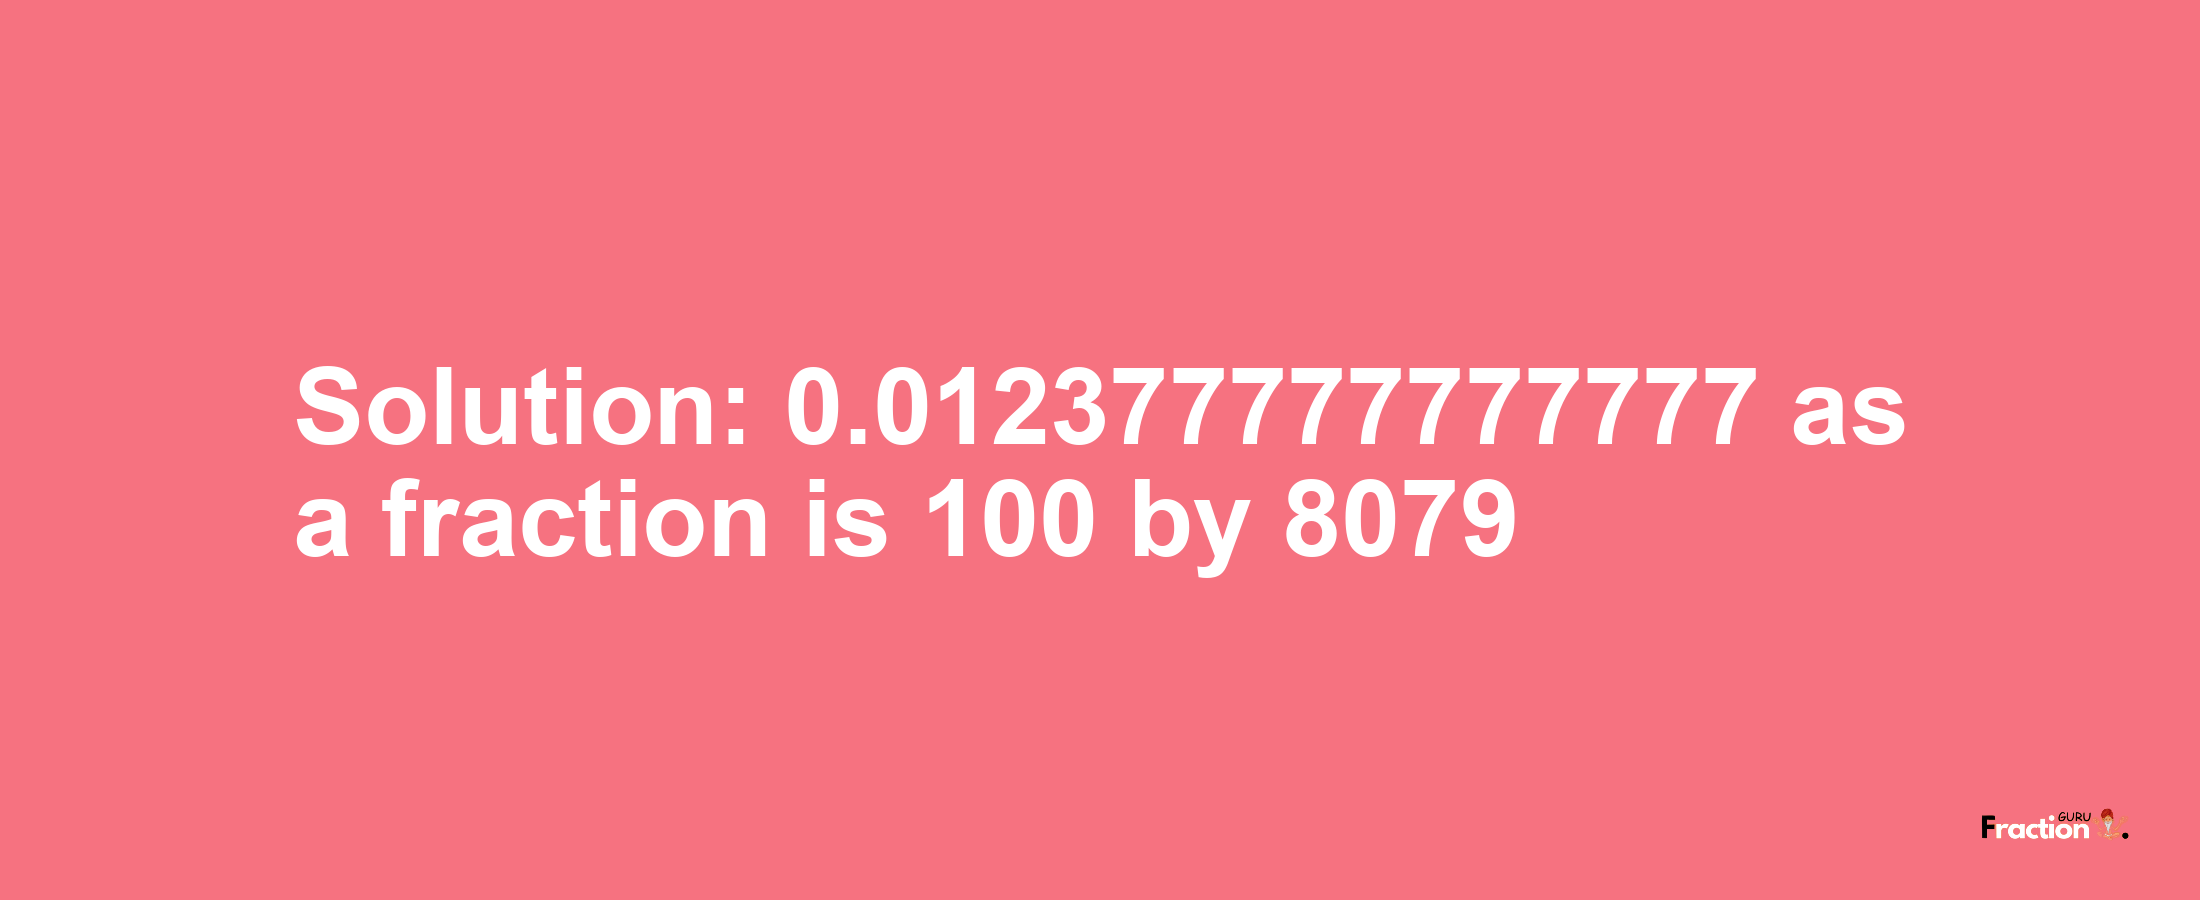 Solution:0.012377777777777 as a fraction is 100/8079